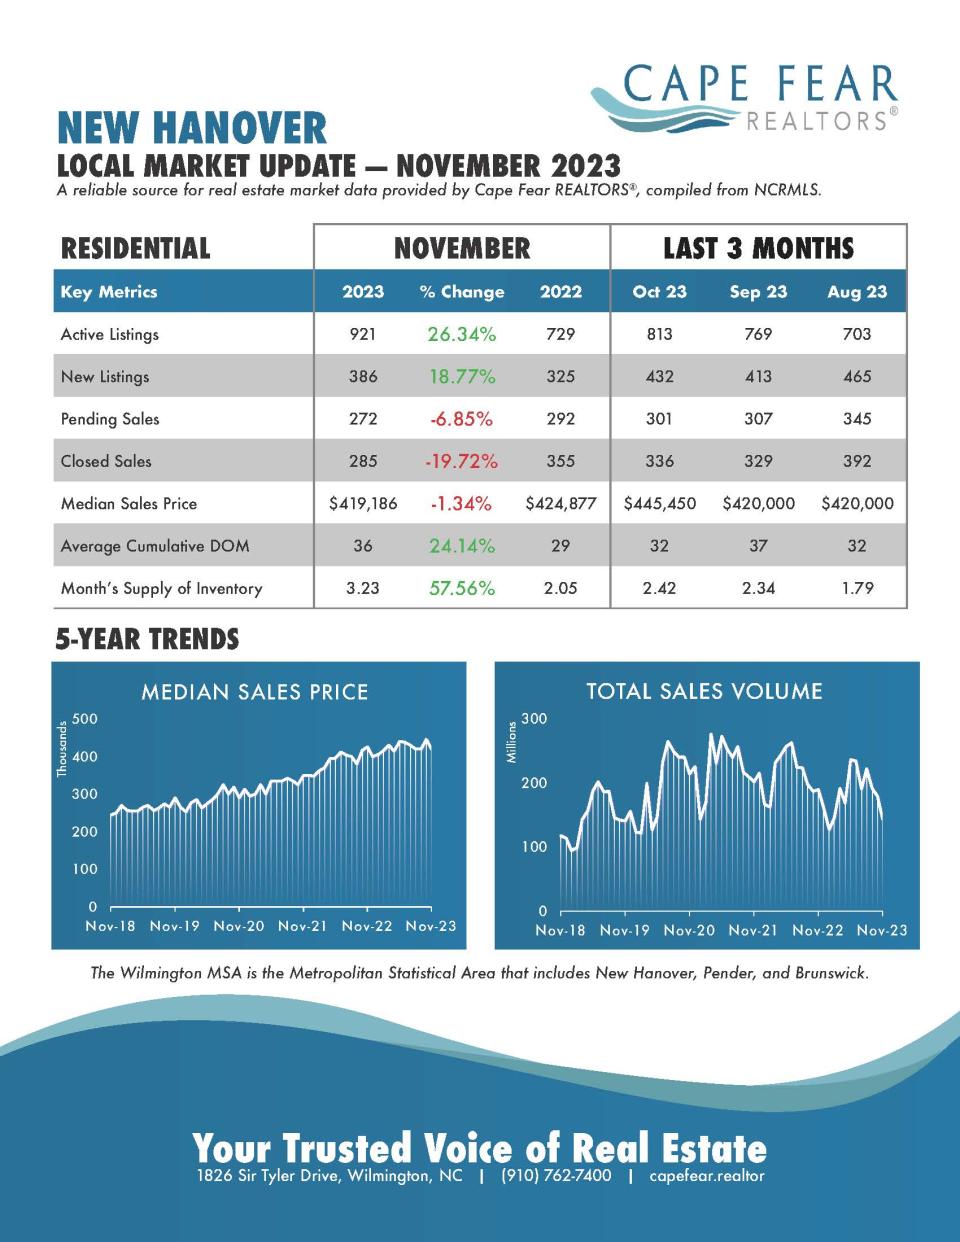 Local real estate market update from the Cape Fear Realtors.